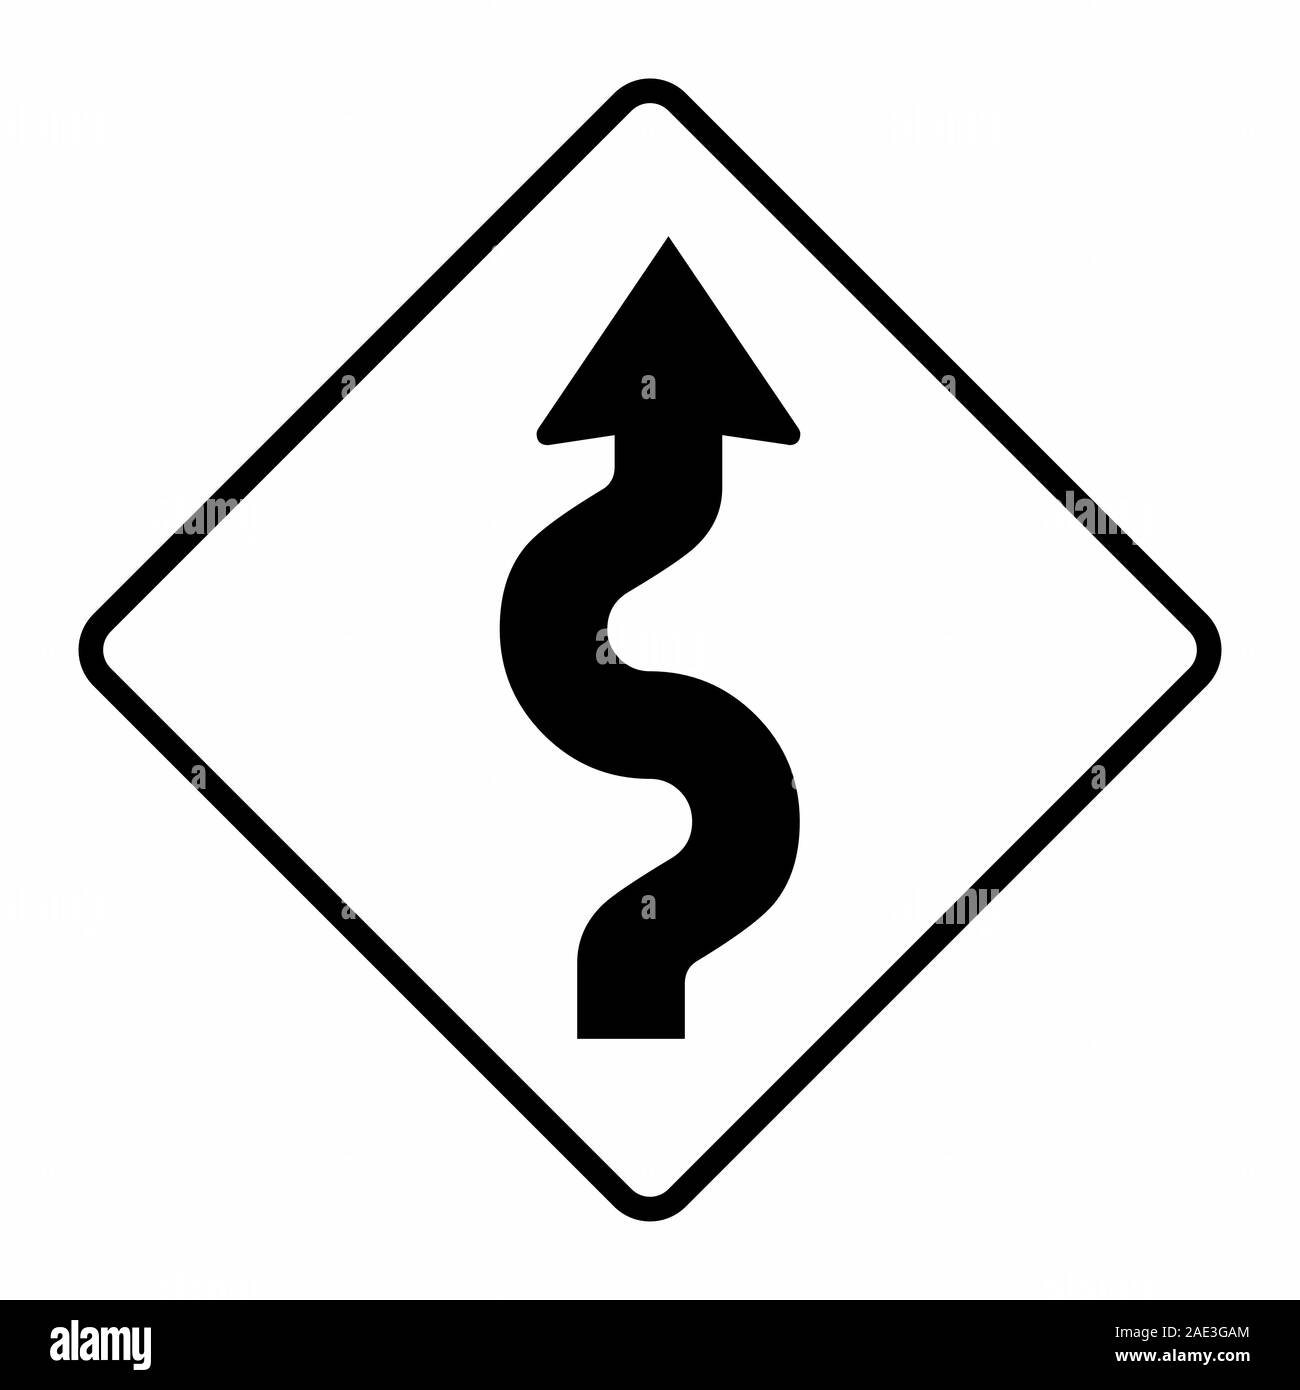 Winding road traffic sign Stock Vector